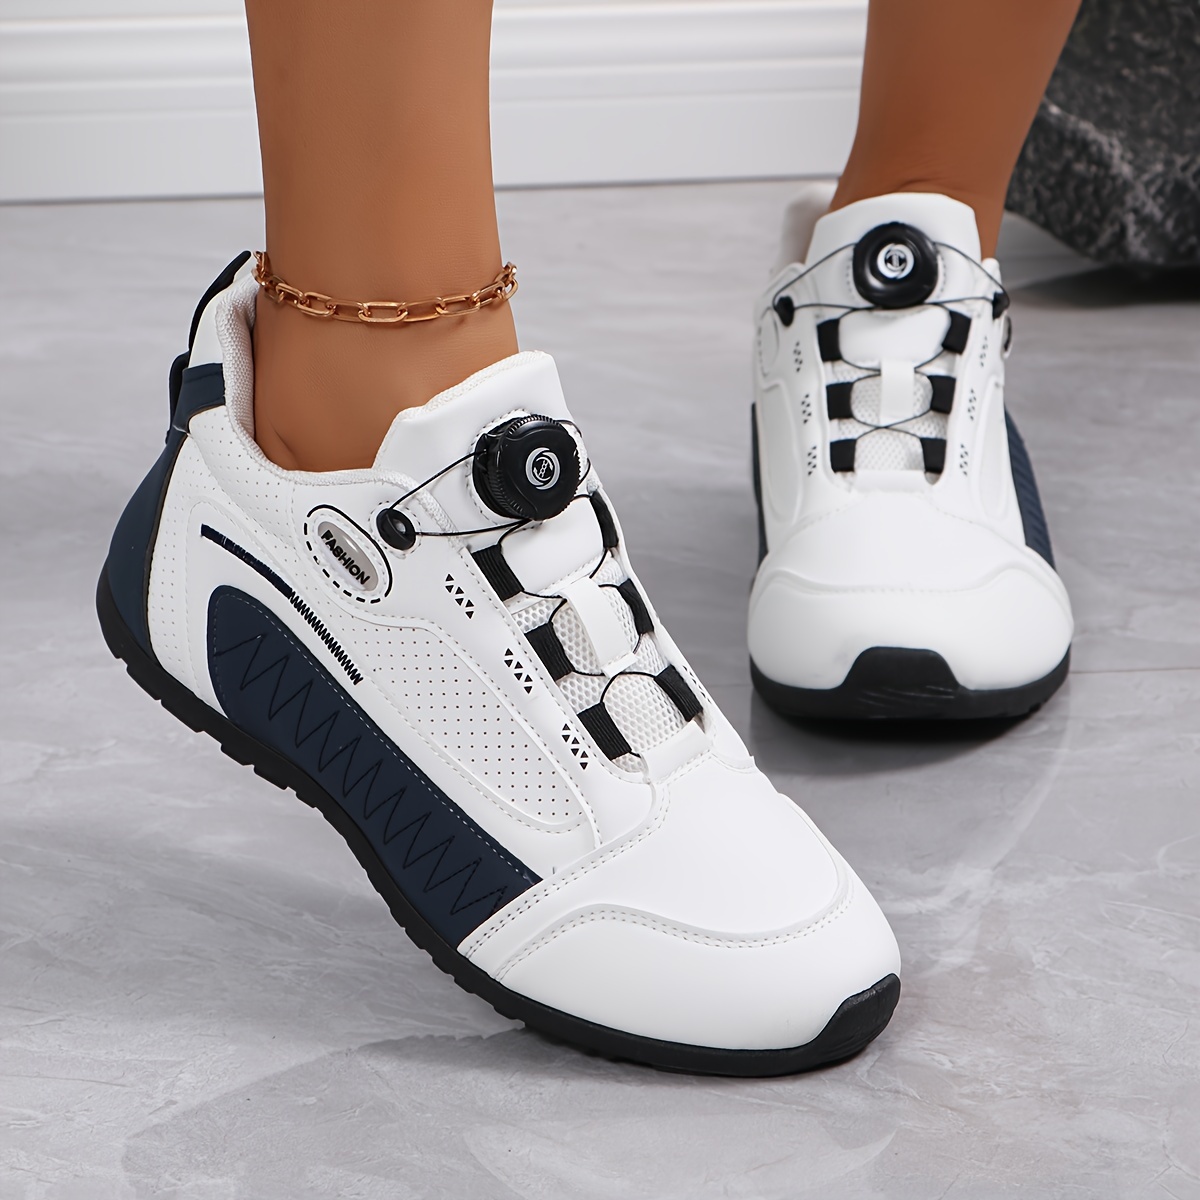 

Contrast Color Casual Sneakers, Rotating Button Platform Soft Sole Stylish Running Shoes, Breathable Low-top Trainers